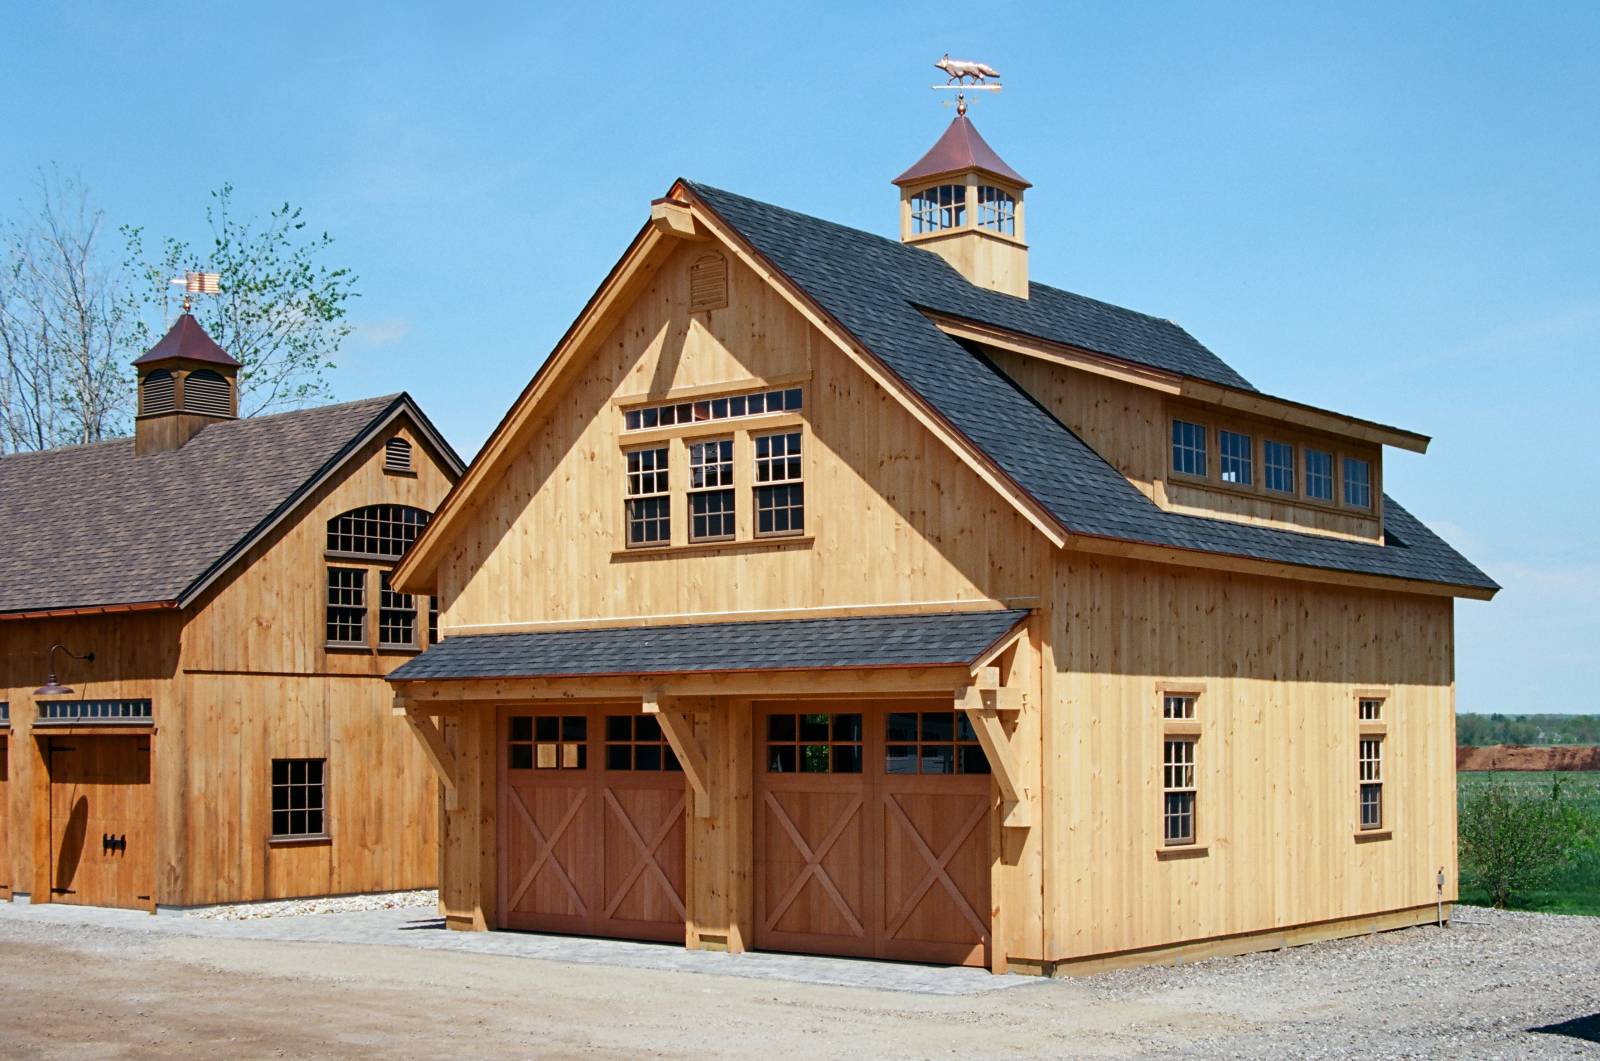 26' x 28' Carriage Barn on display at our Ellington CT location